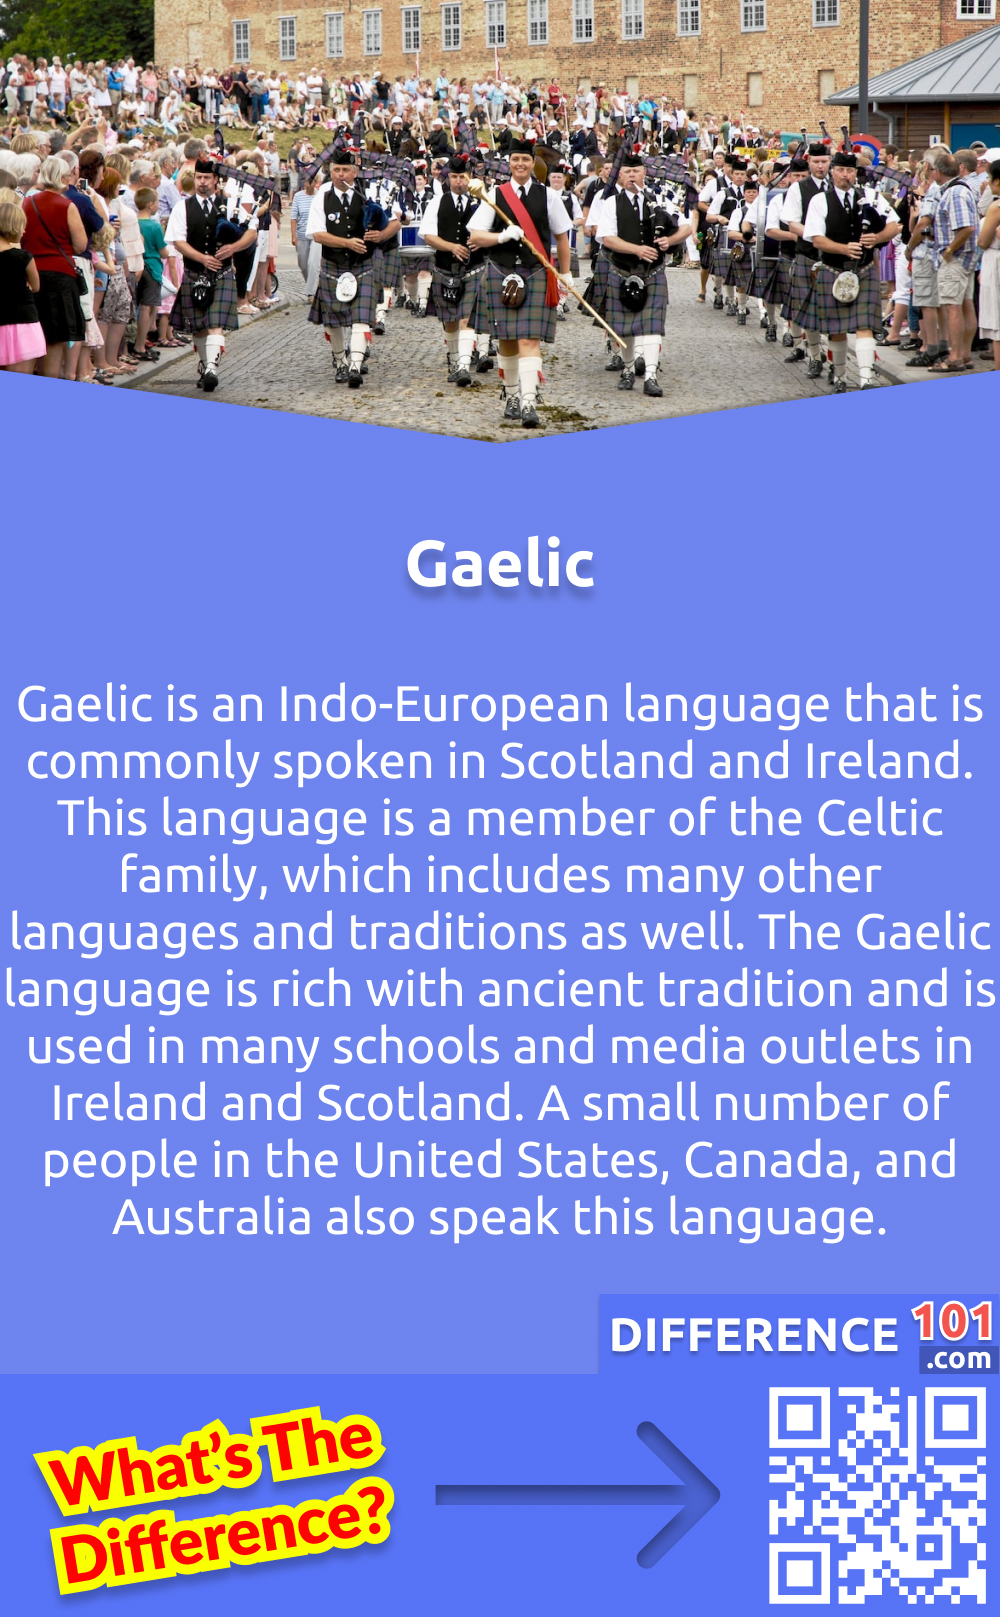 What Is the Gaelic Language? Gaelic is an Indo-European language that is commonly spoken in Scotland and Ireland. This language is a member of the Celtic family, which includes many other languages and traditions as well. The Gaelic language is rich with ancient tradition and is used in many schools and media outlets in Ireland and Scotland. A small number of people in the United States, Canada, and Australia also speak this language.